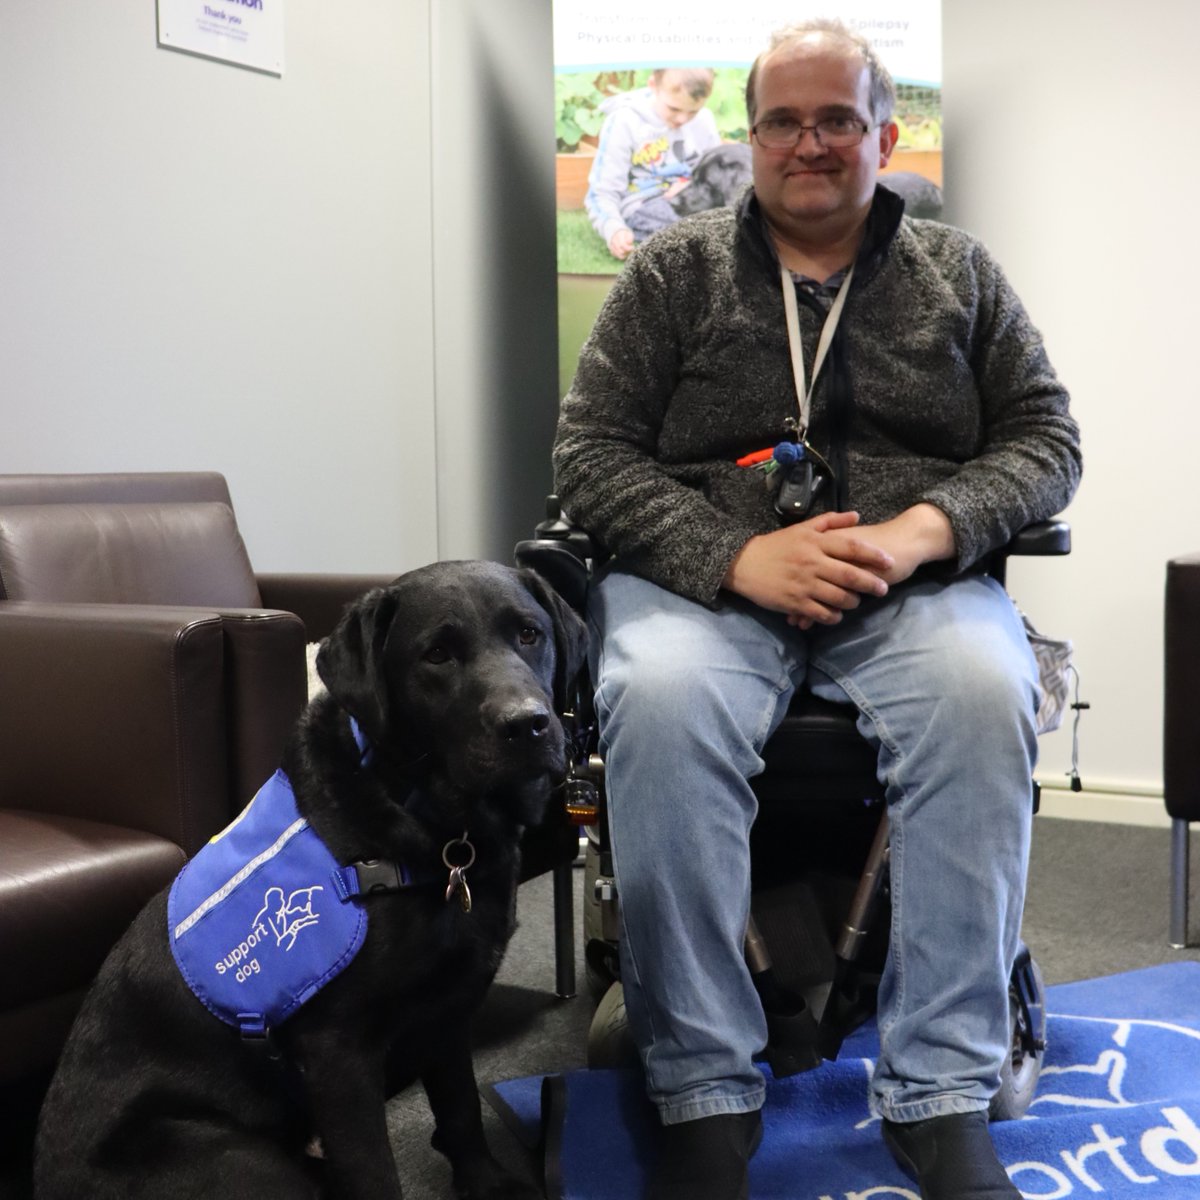 Ex NHS worker Chris Beddoes has a crumbling spinal condition and his home became a virtual prison. But since having his pet dog Charlie trained by national charity Support Dogs, his life has been transformed... More: bit.ly/3NWbsL4